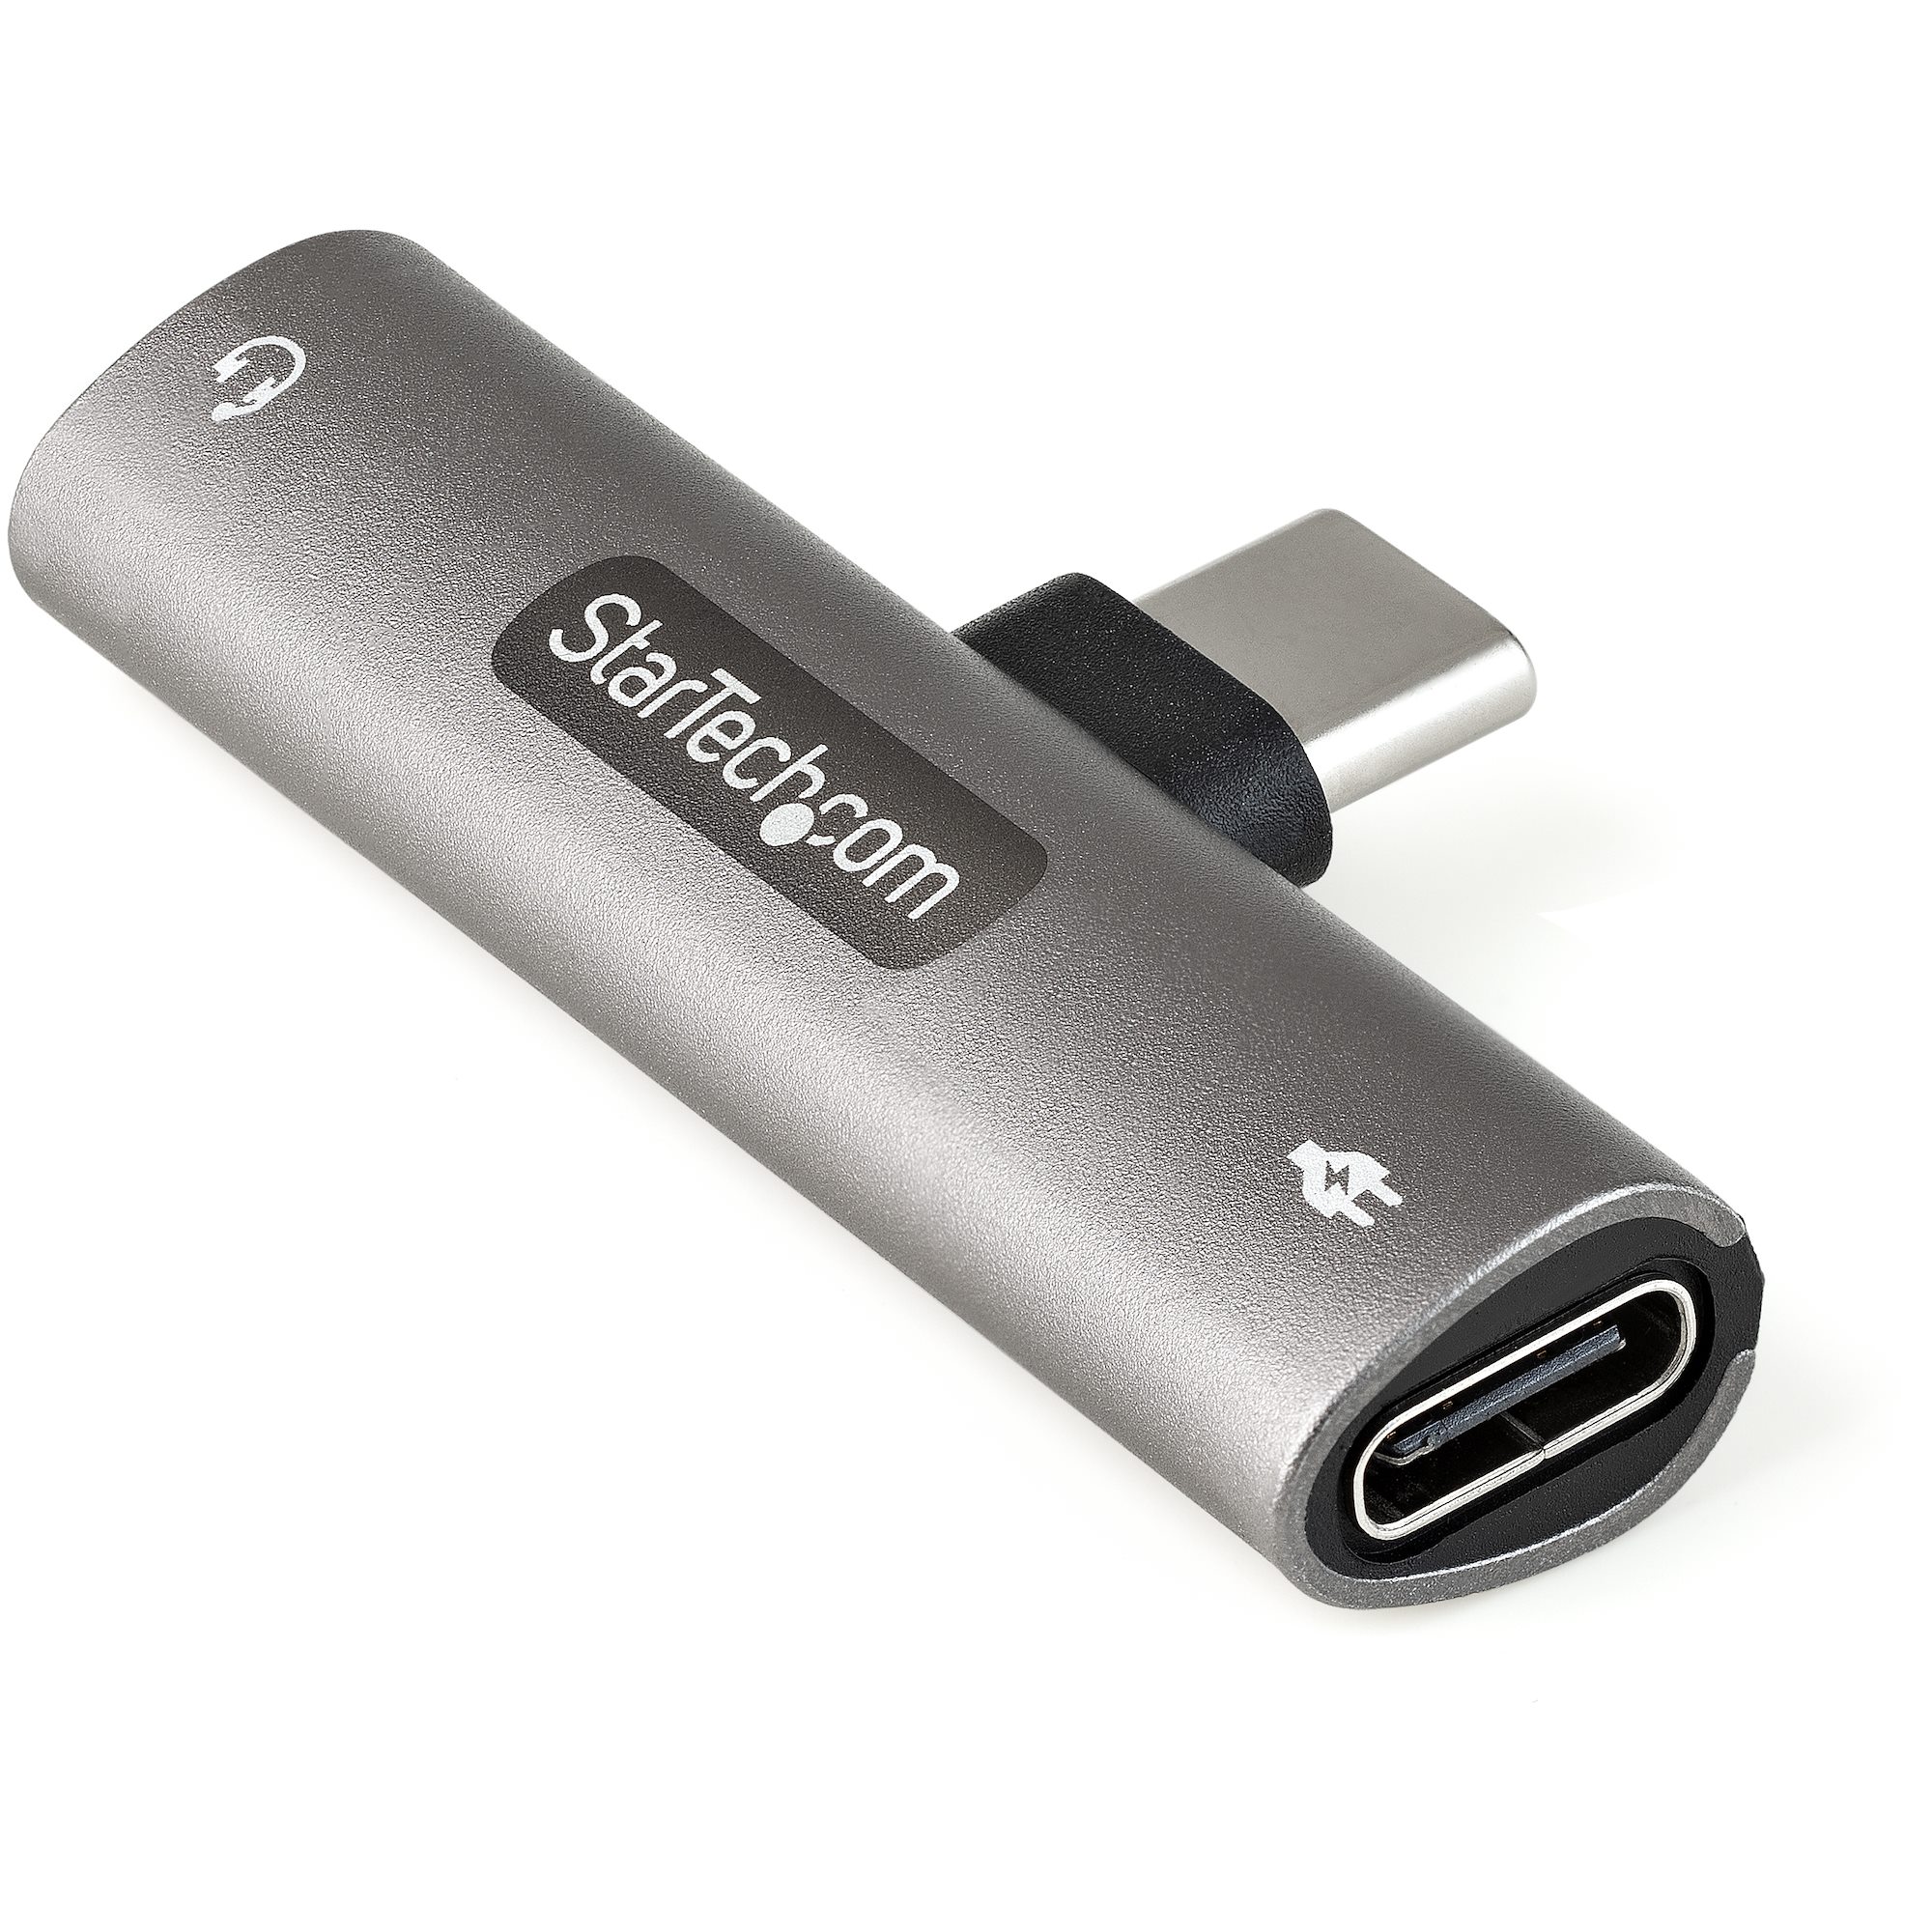 【CDP235APDM】USB C AUDIO & CHARGE ADAPTER - 3